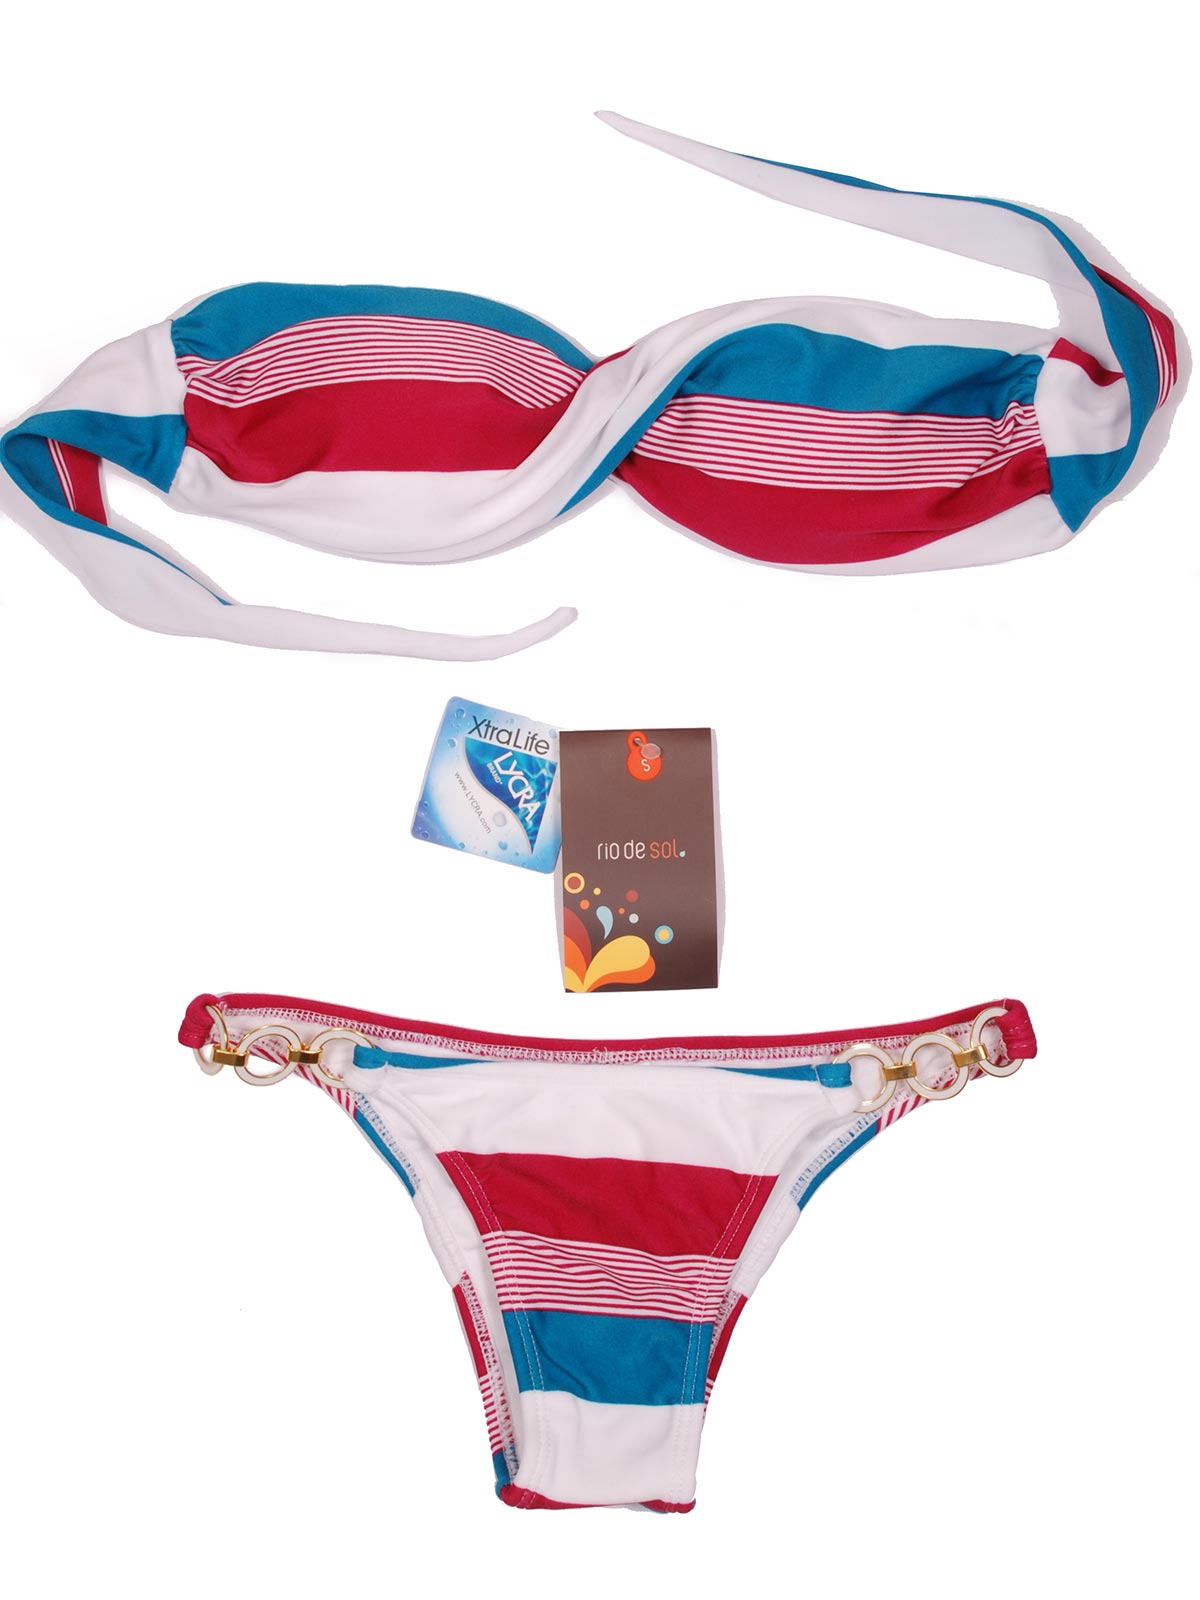 Striped bikini with athermic rings at sides.